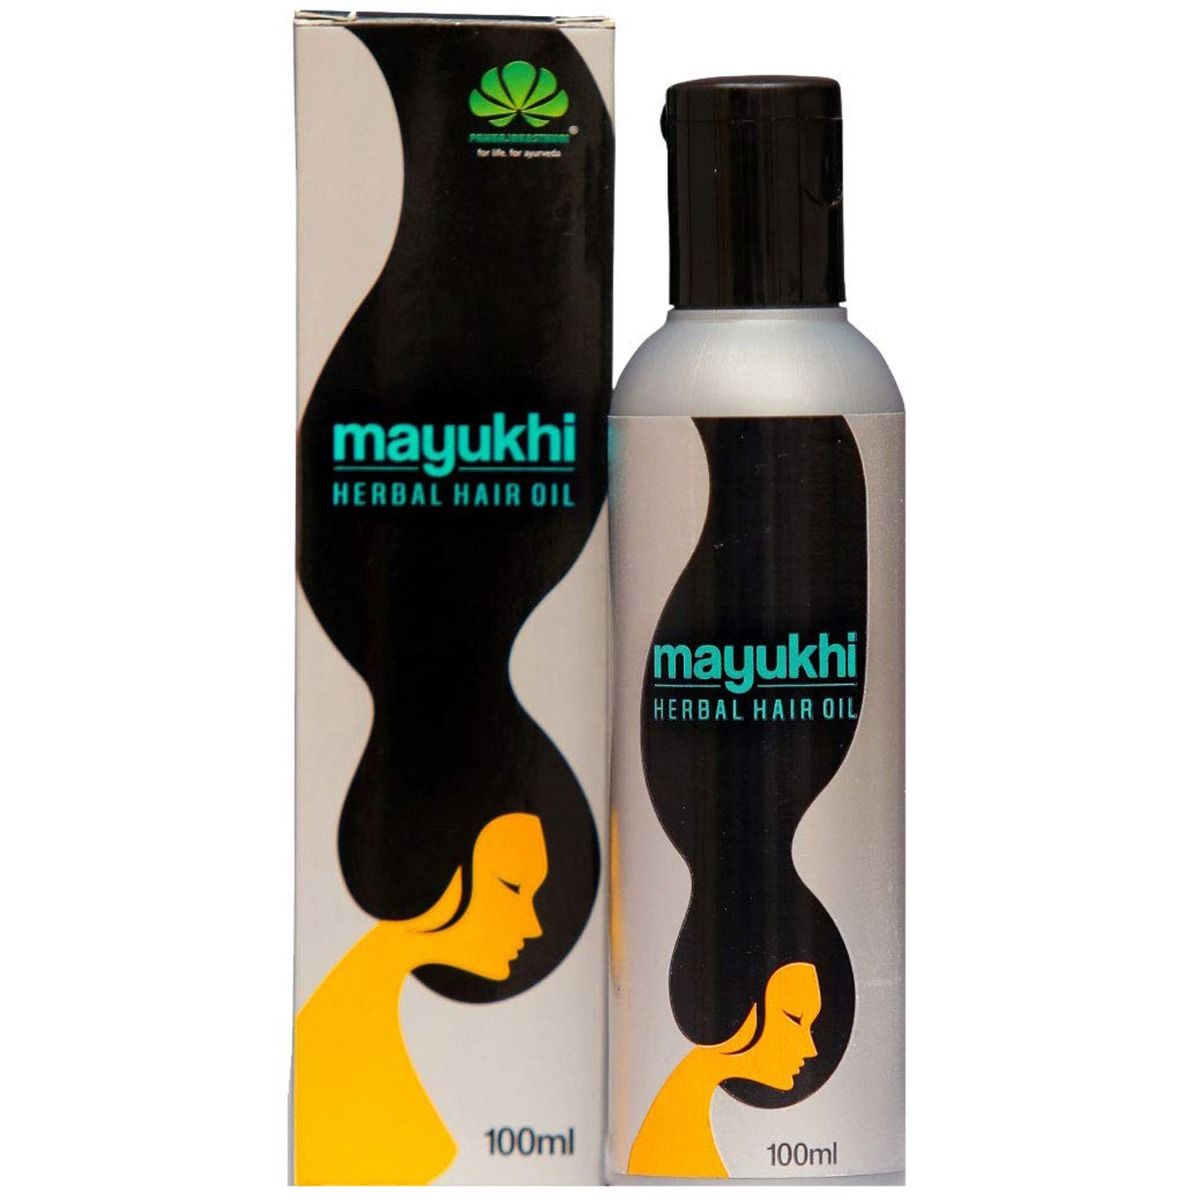 Mayukhi Herbal Hair Oil, 100 ml Price, Uses, Side Effects, Composition -  Apollo Pharmacy